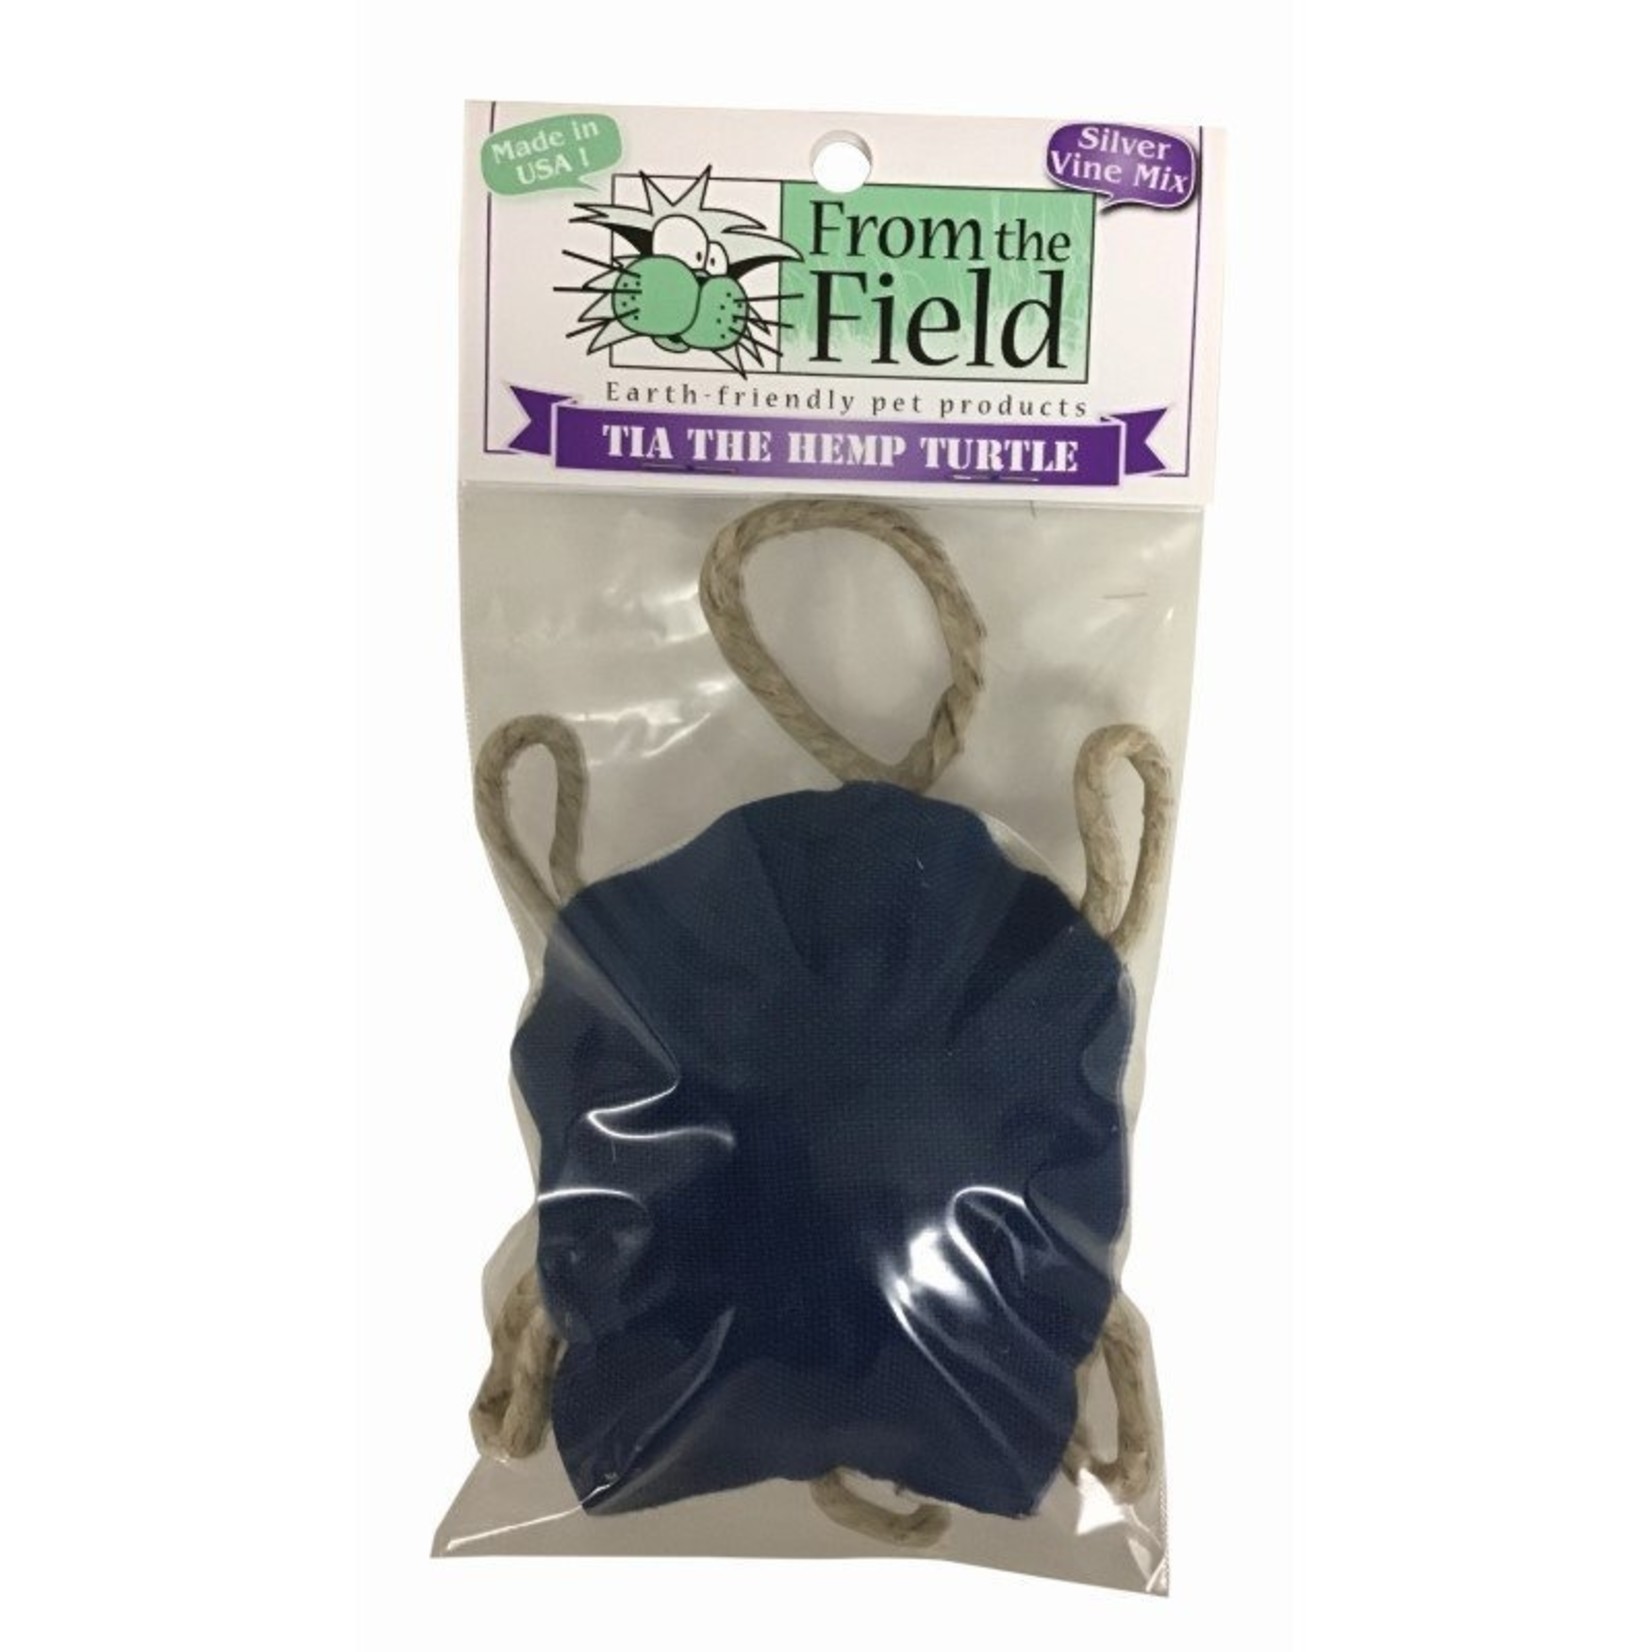 From the Field From the Field Tia the Hemp Turtle Natural Cat Toy with Catnip & Silver Vine